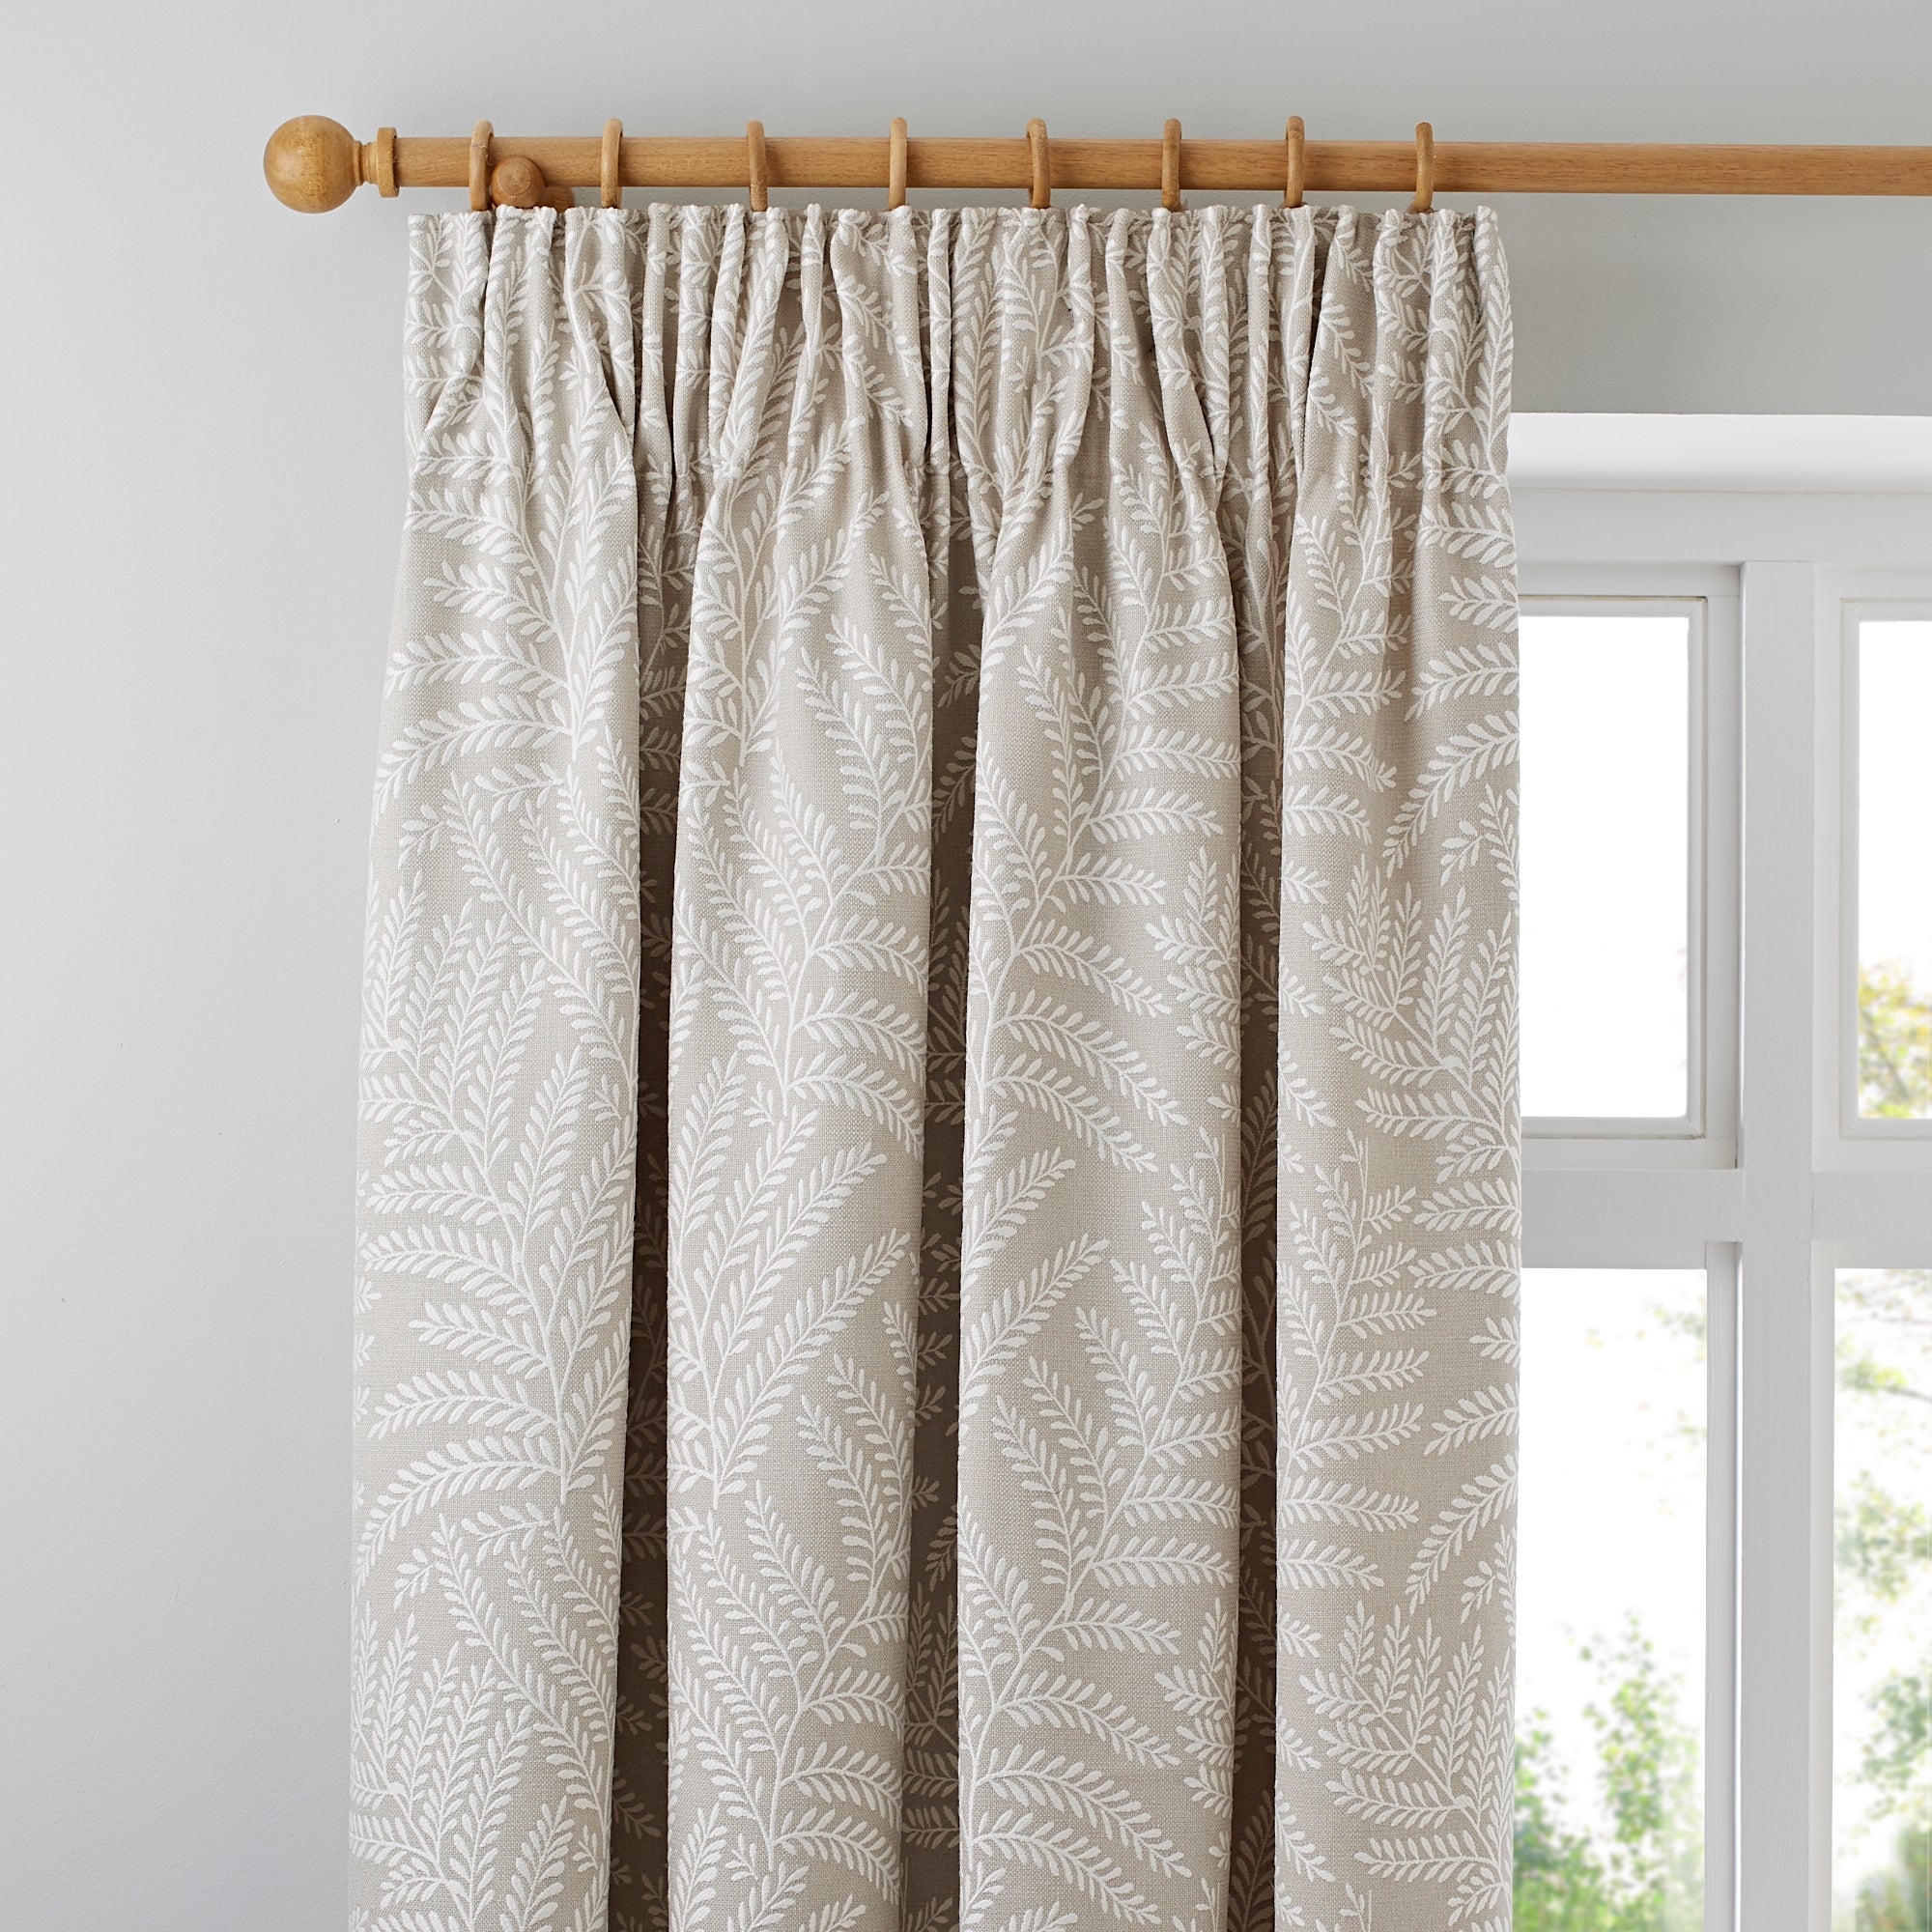 Ready Made Curtains - Browse Our Full Range | Dunelm | Page 2